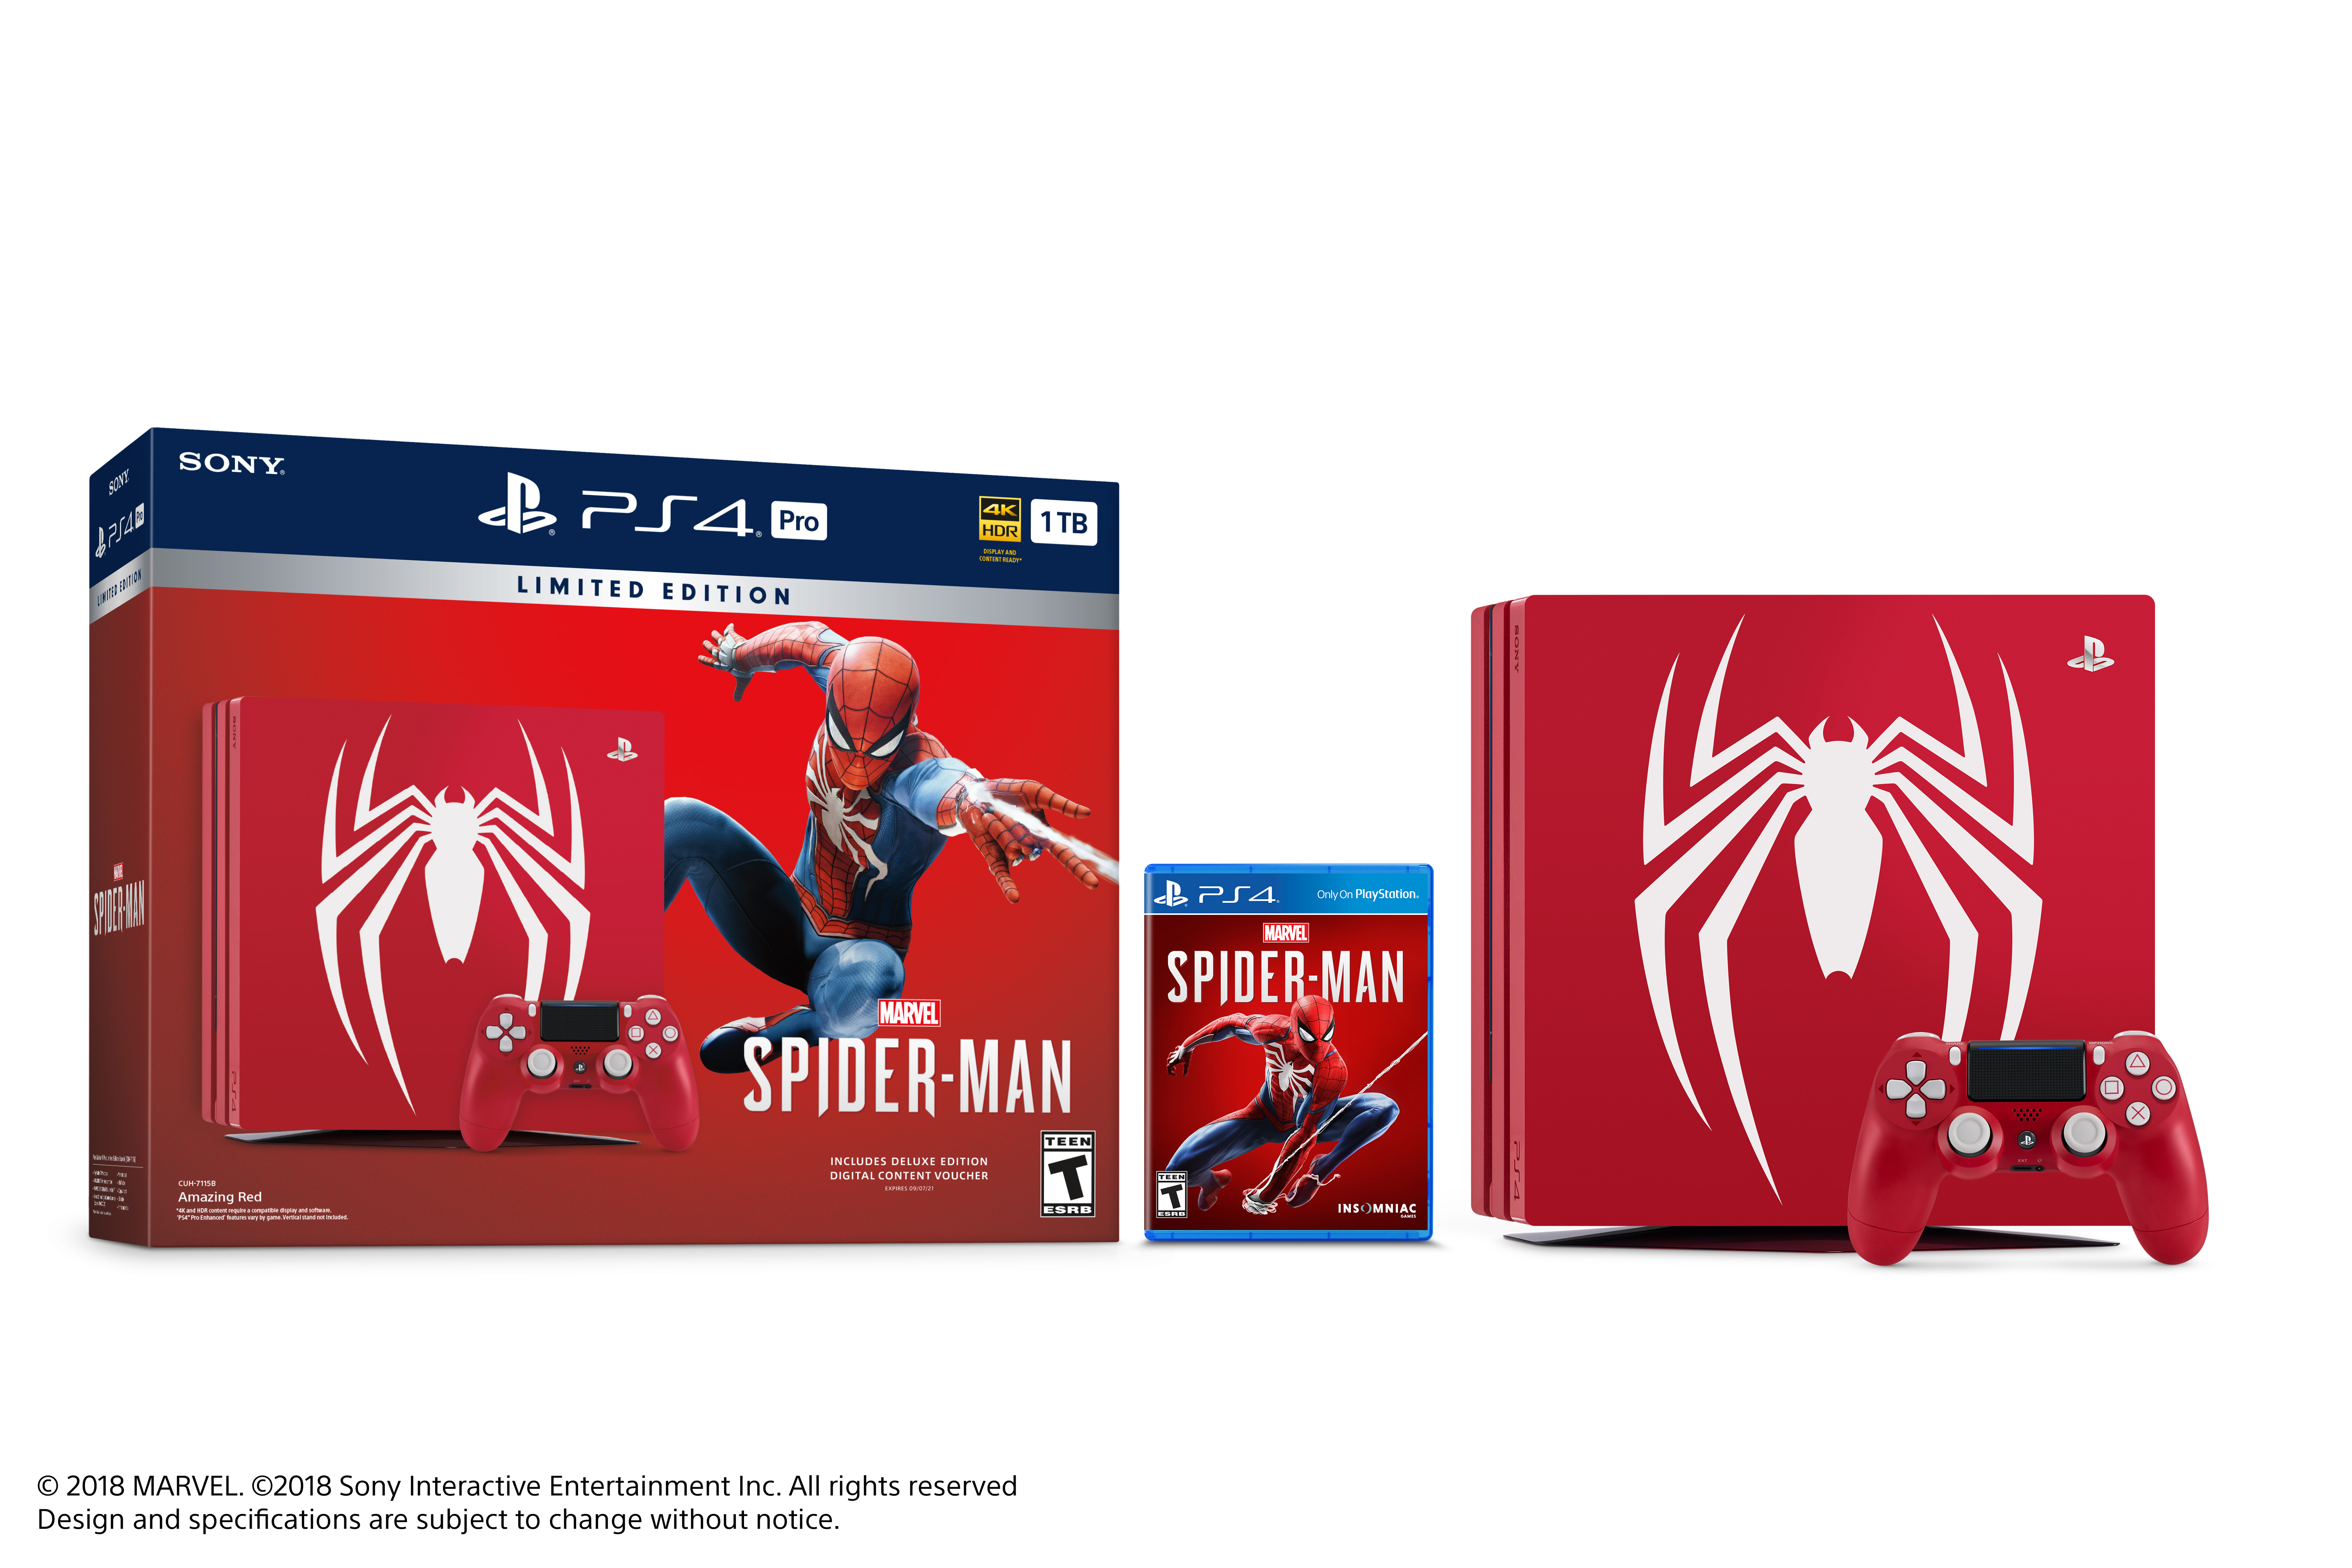 Sony Limited Edition Marvels Spider-Man PS4 Pro 1TB Bundle, Red - image 1 of 8